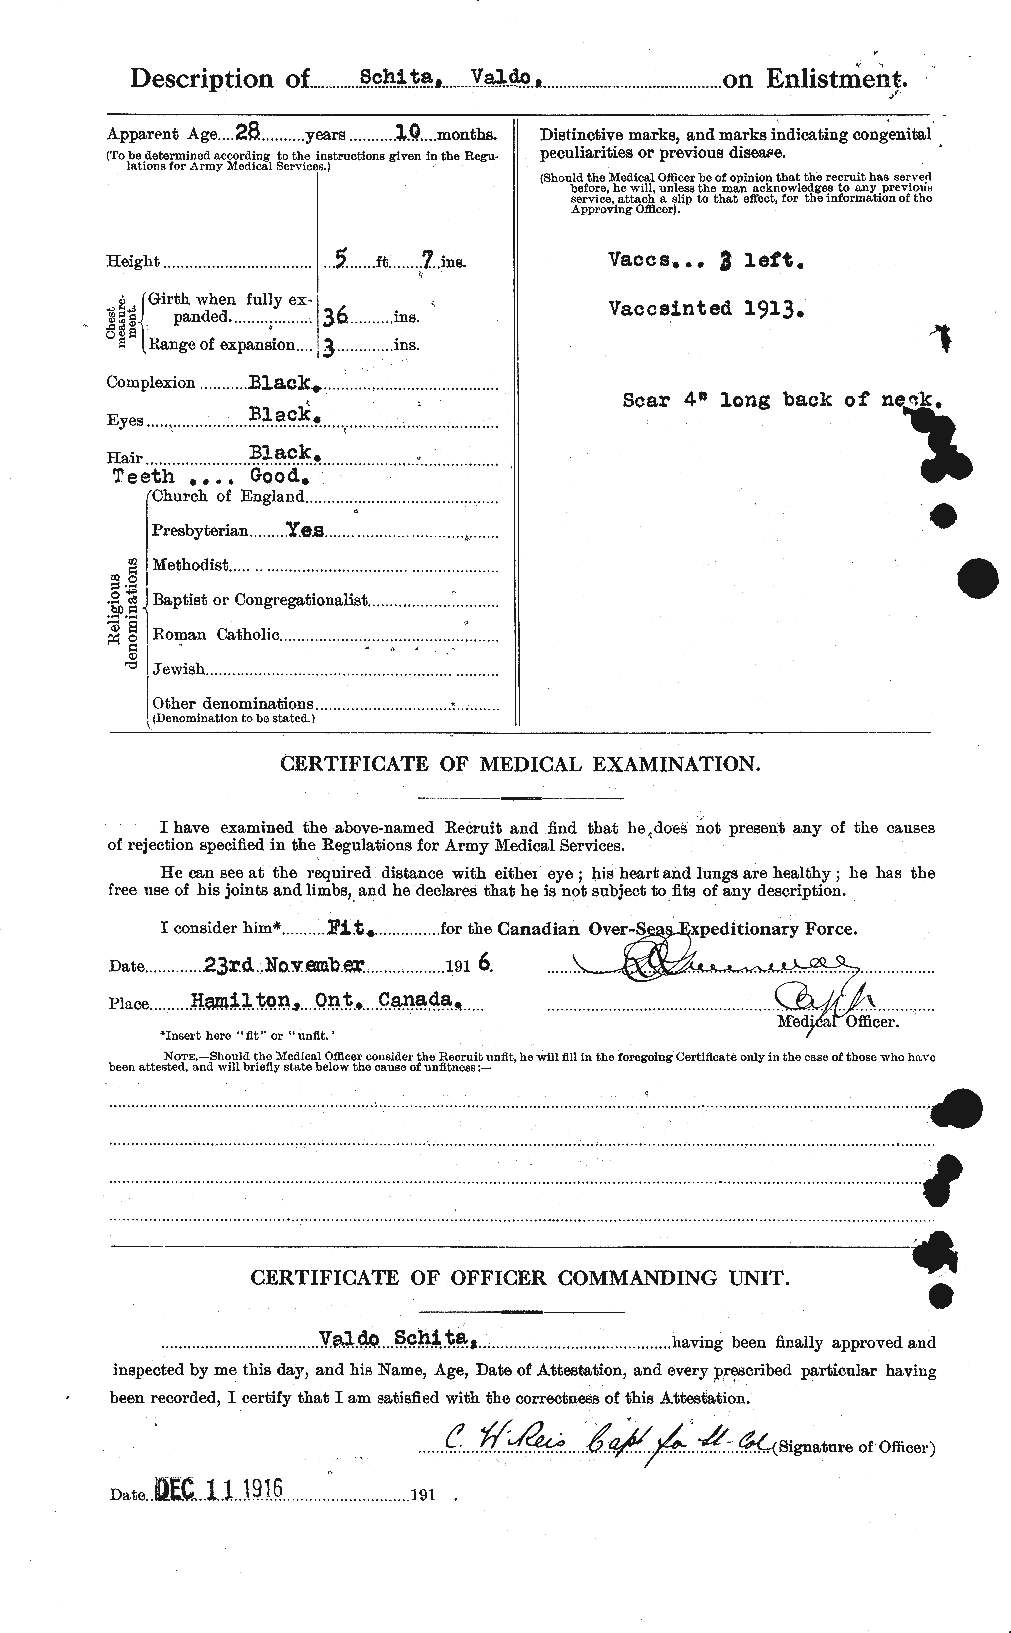 Personnel Records of the First World War - CEF 083431b